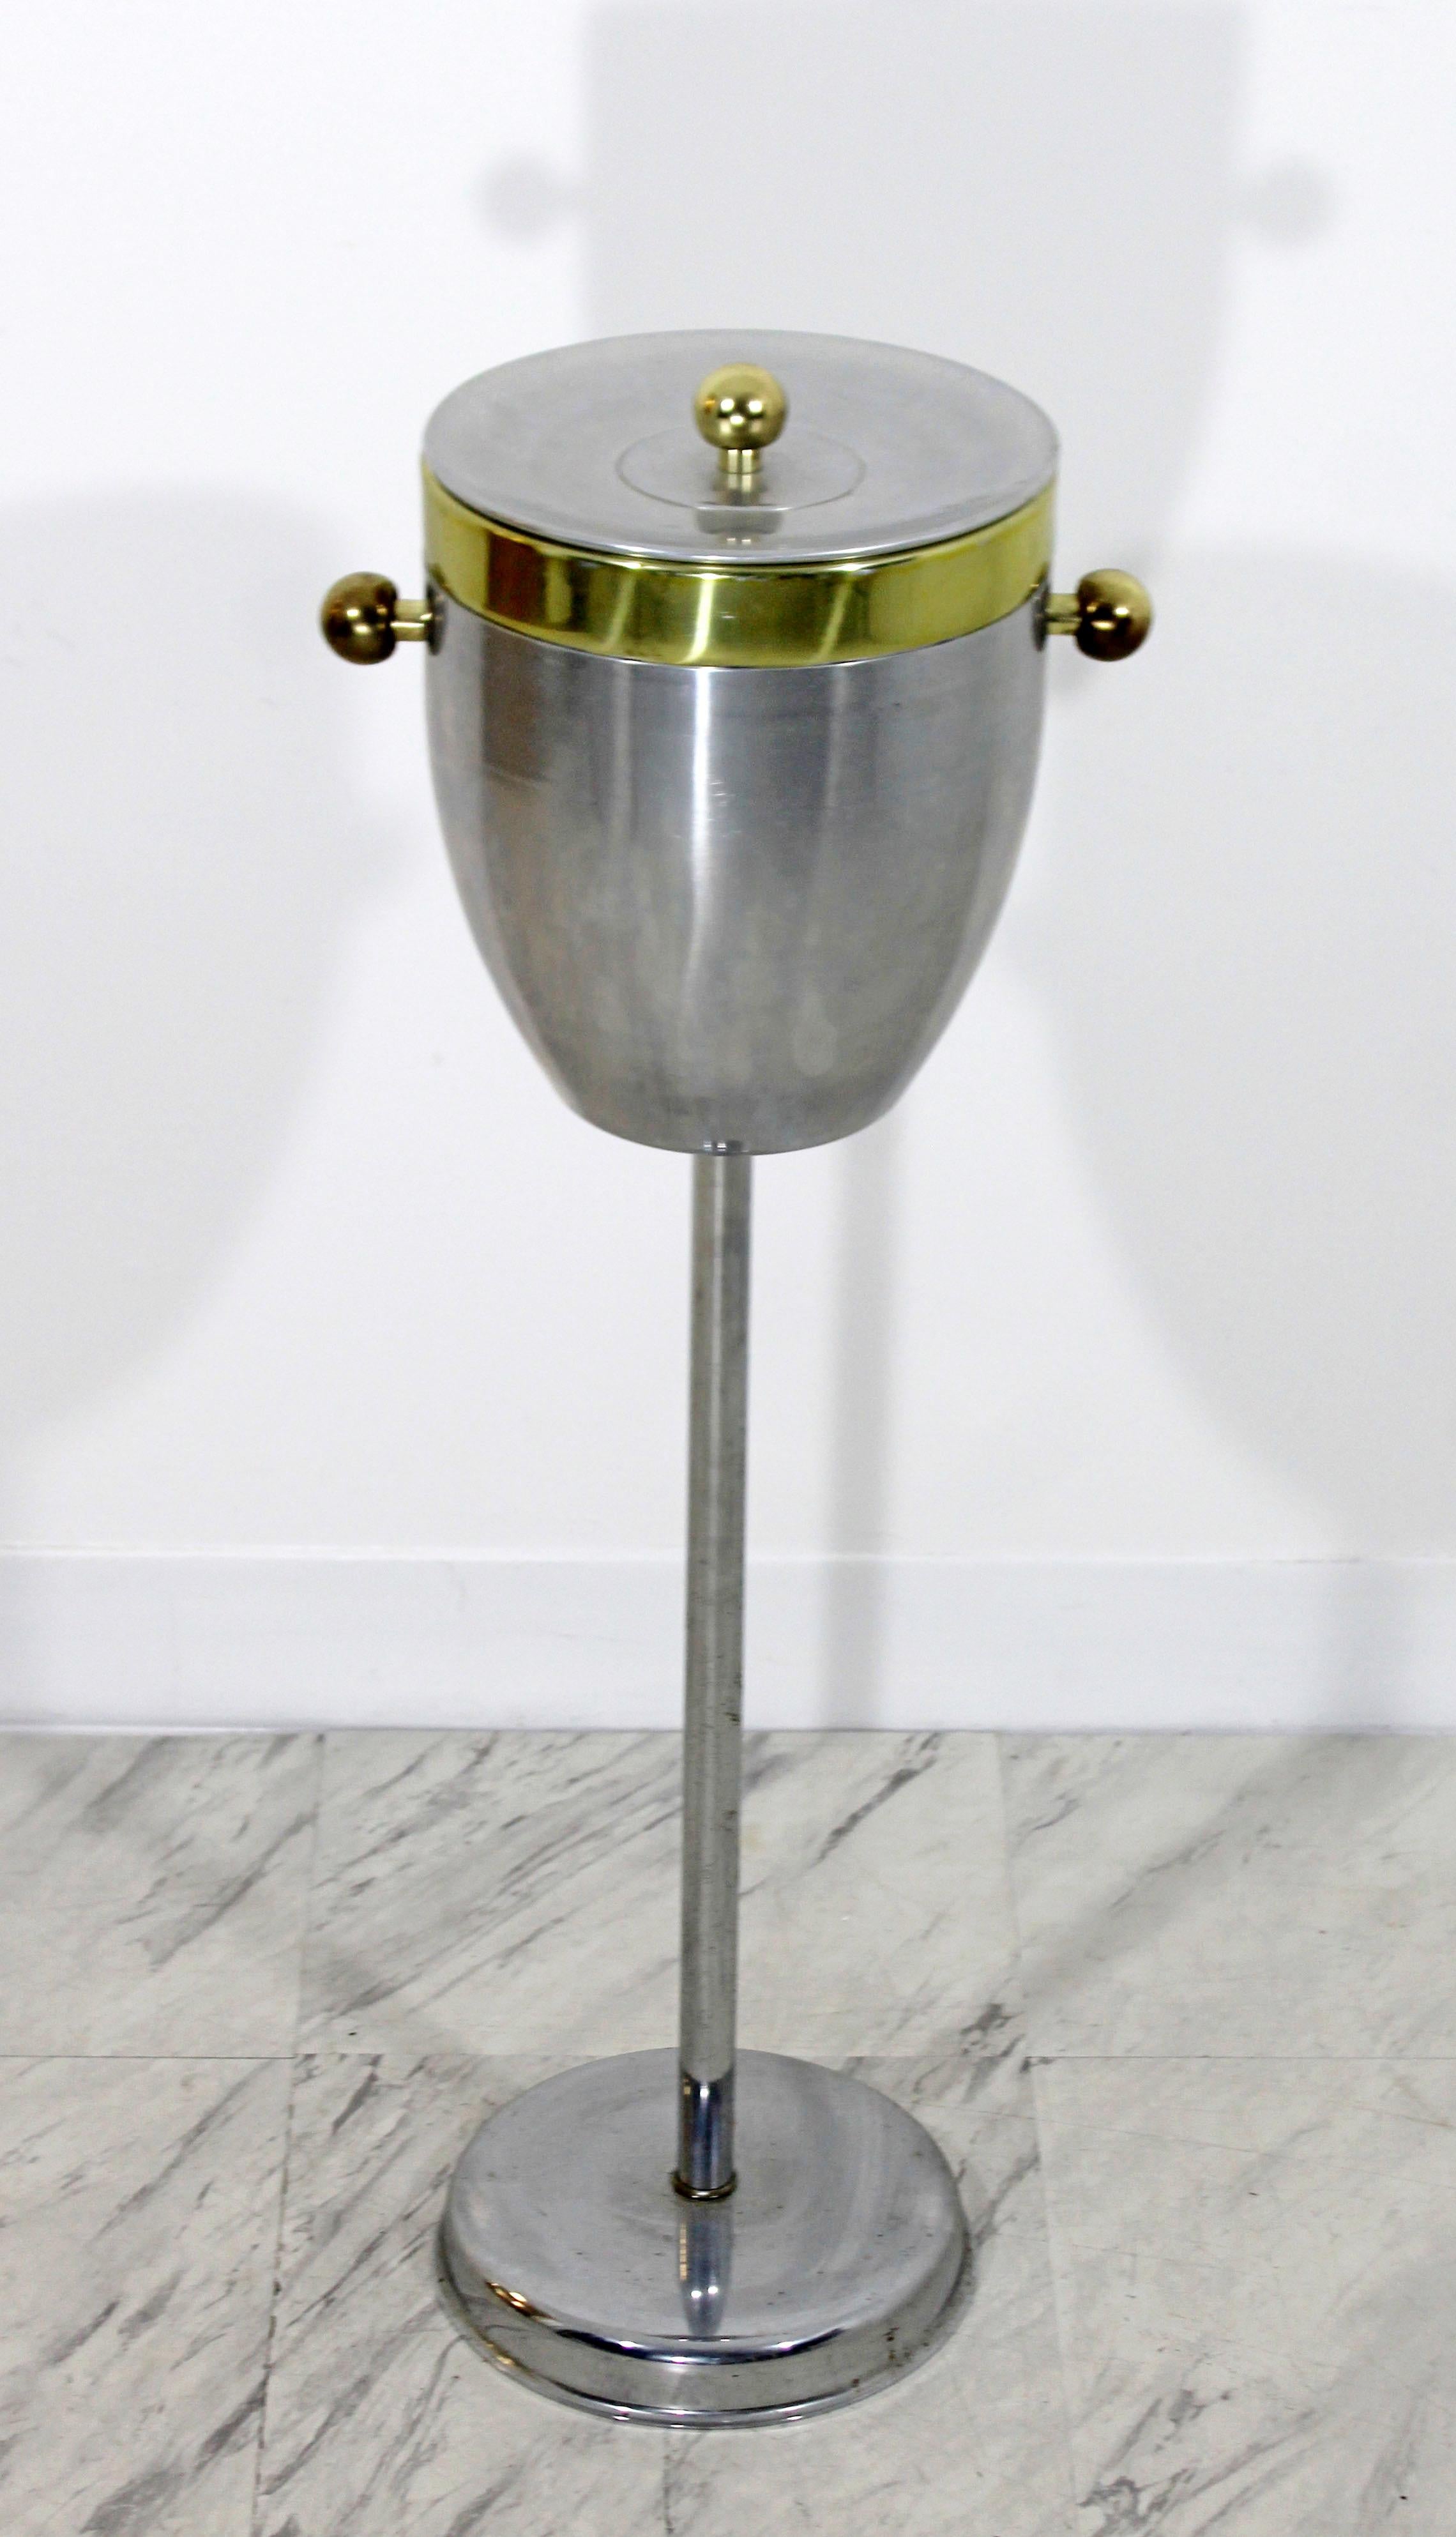 For your consideration is an original, Art Deco, chrome and brass, champagne or ice standing cooler. In excellent condition. The dimensions are 11